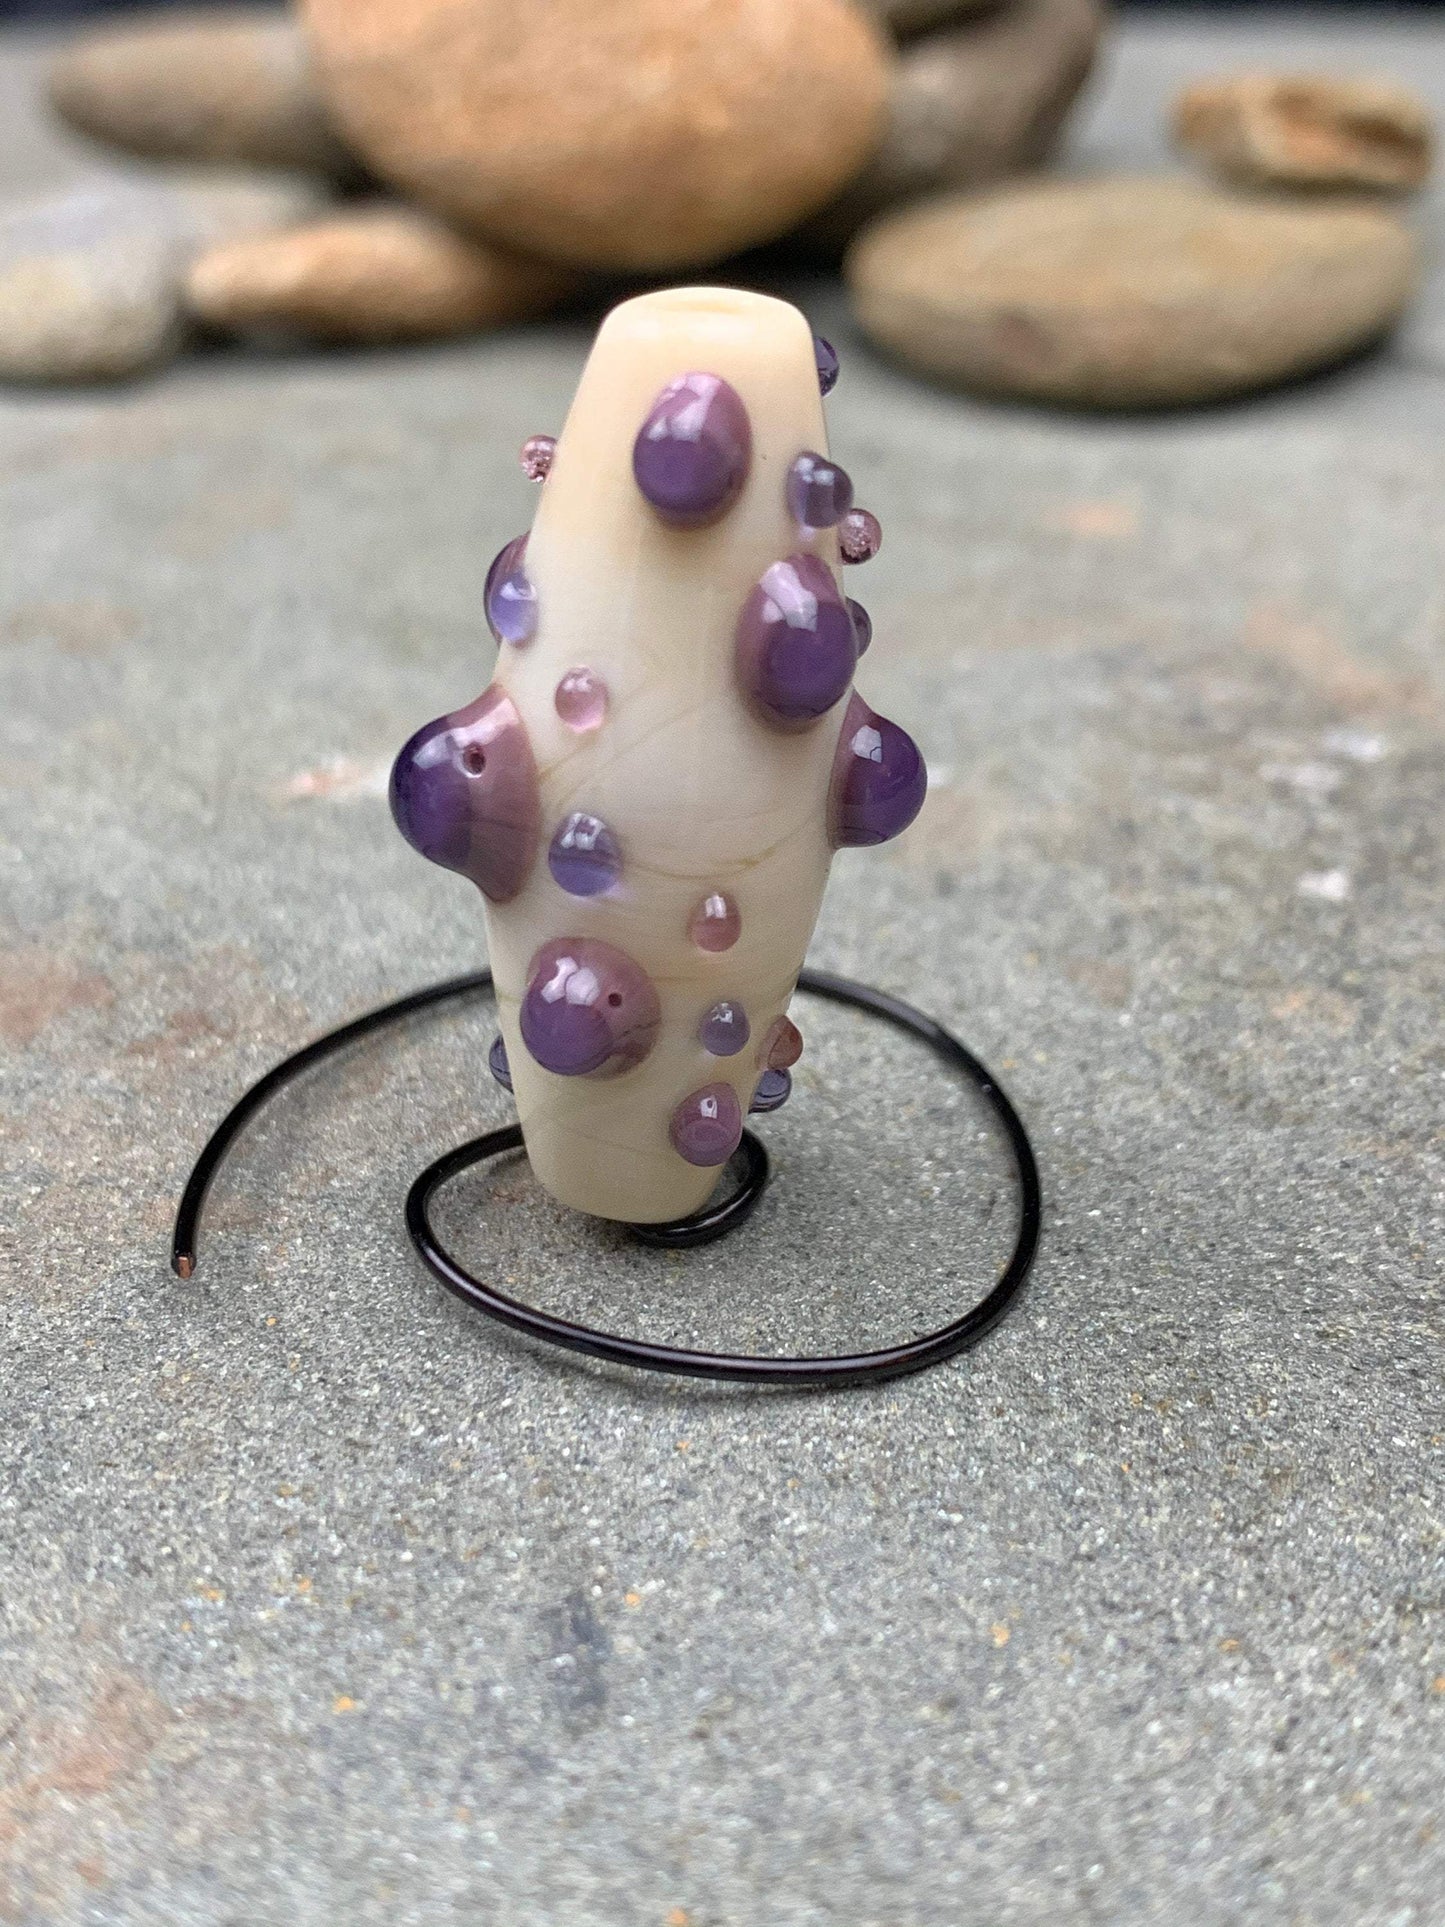 a handmade lampworked glass bead with purple and mauve dots on a white background